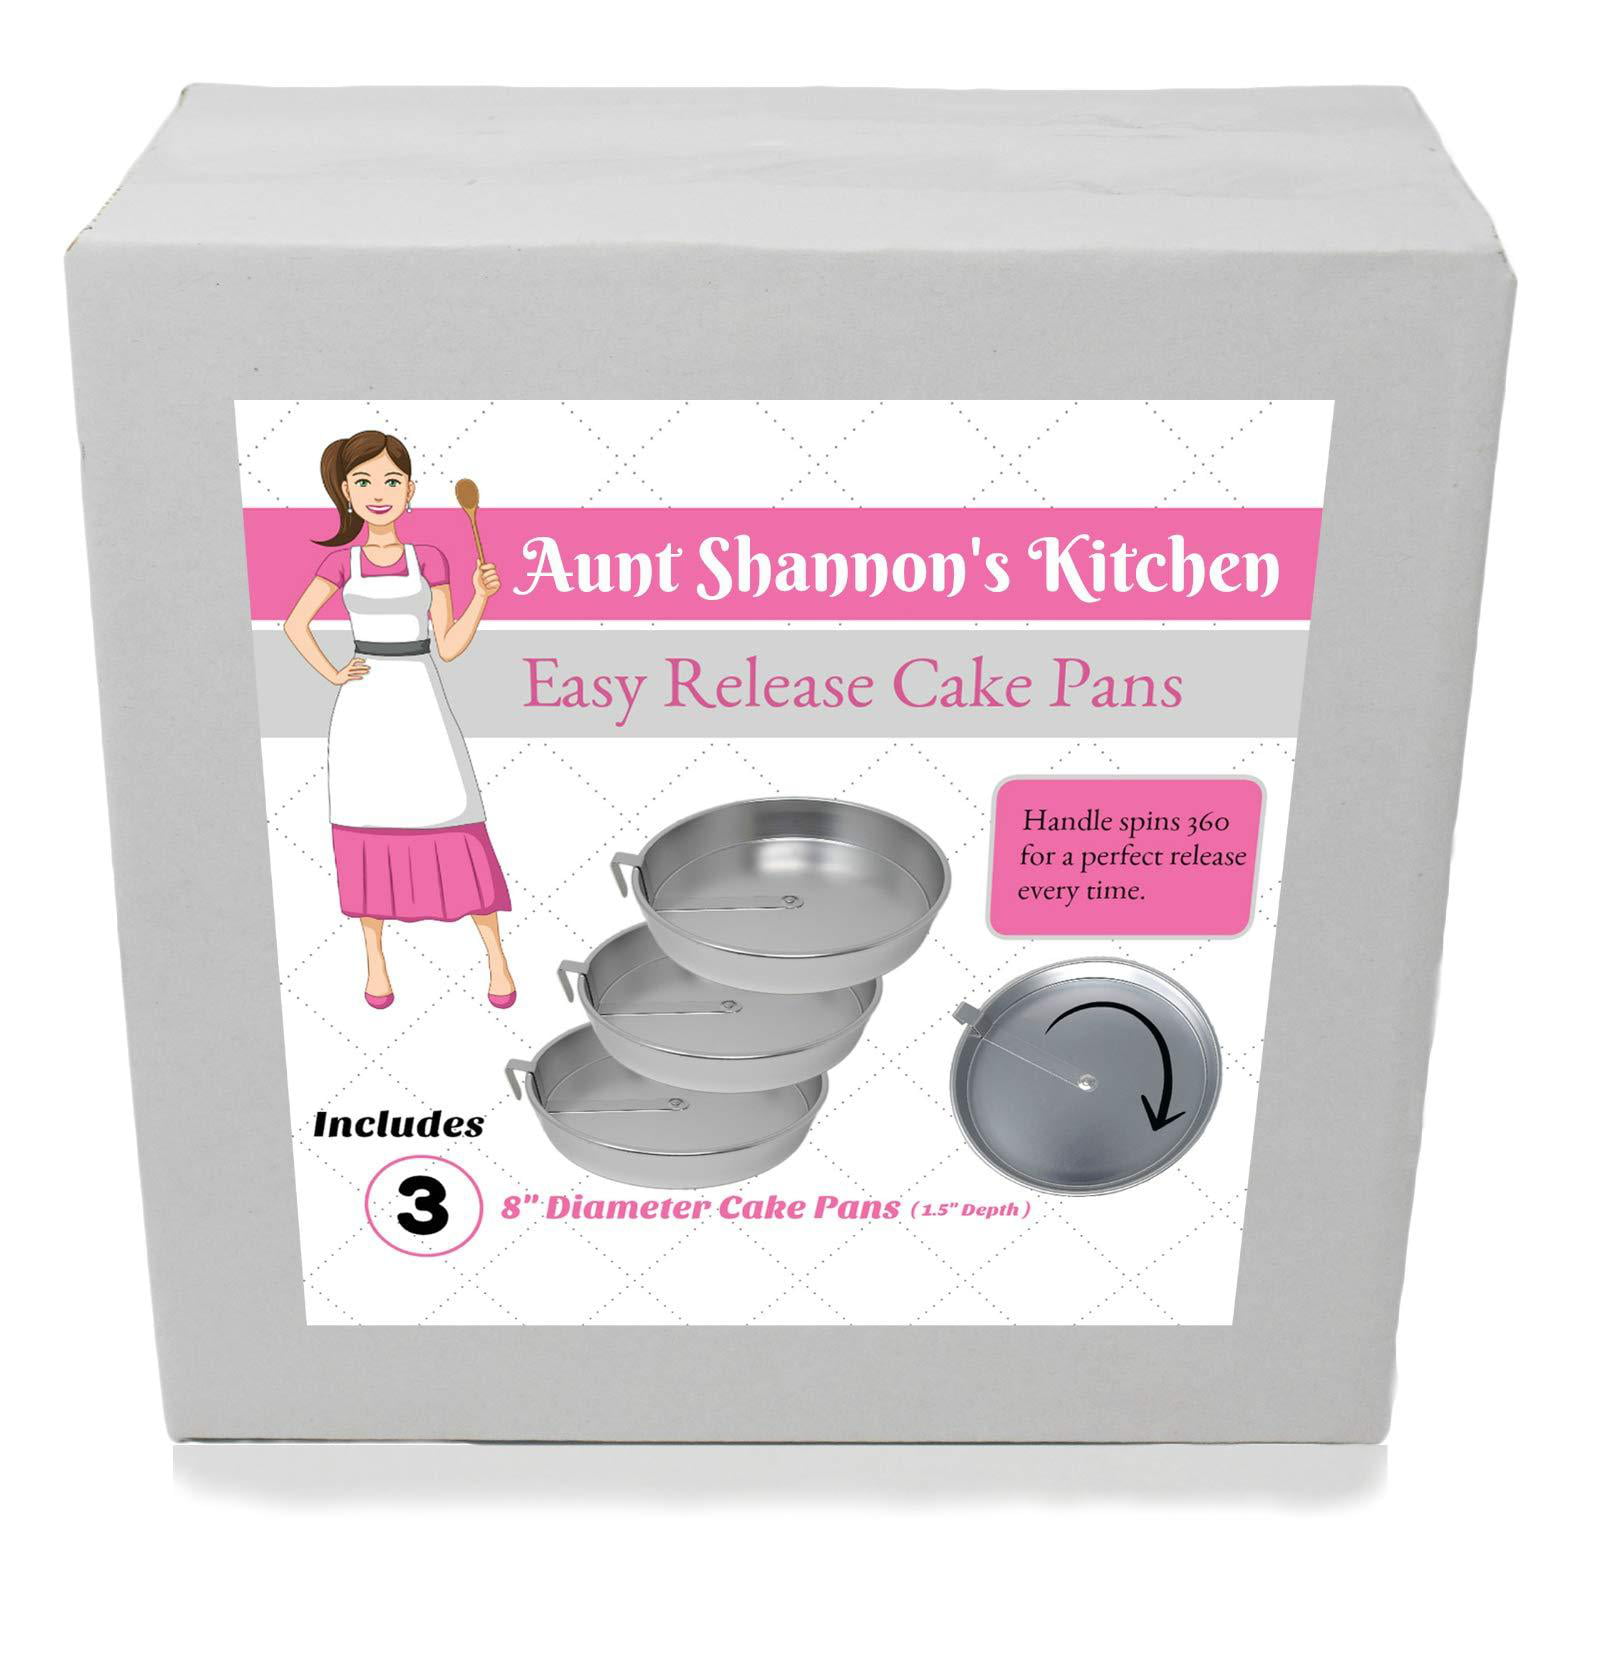 Aunt Shannon's Kitchen 8 Inch Round Cake Pans, 3 Pack, Silver Cake Pan with  a Built-in Swivel Blade, Easy Release Cake Pans Set for Baking, Baking